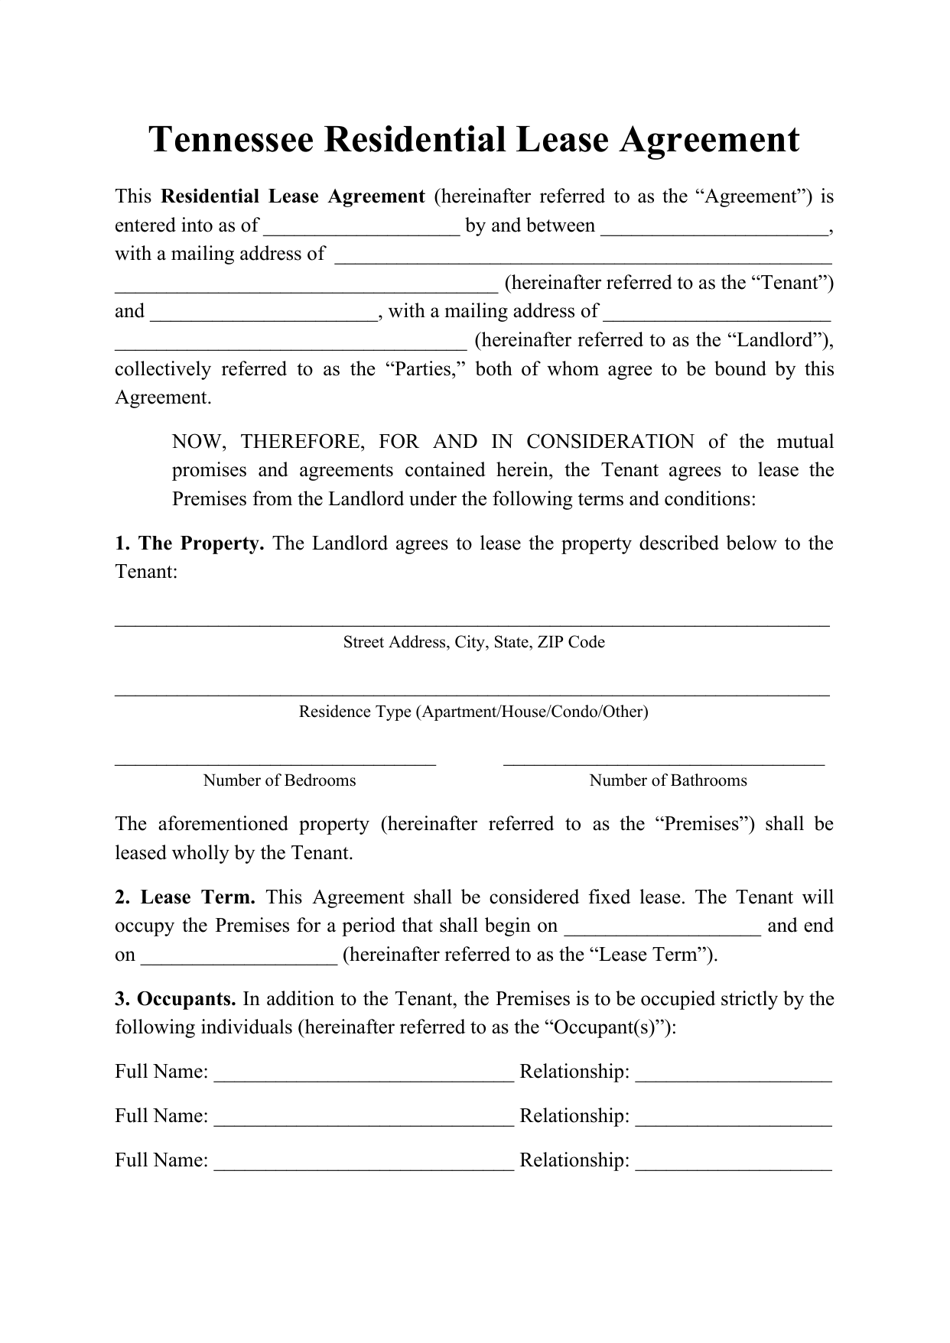 Residential Lease Agreement Template - Tennessee, Page 1